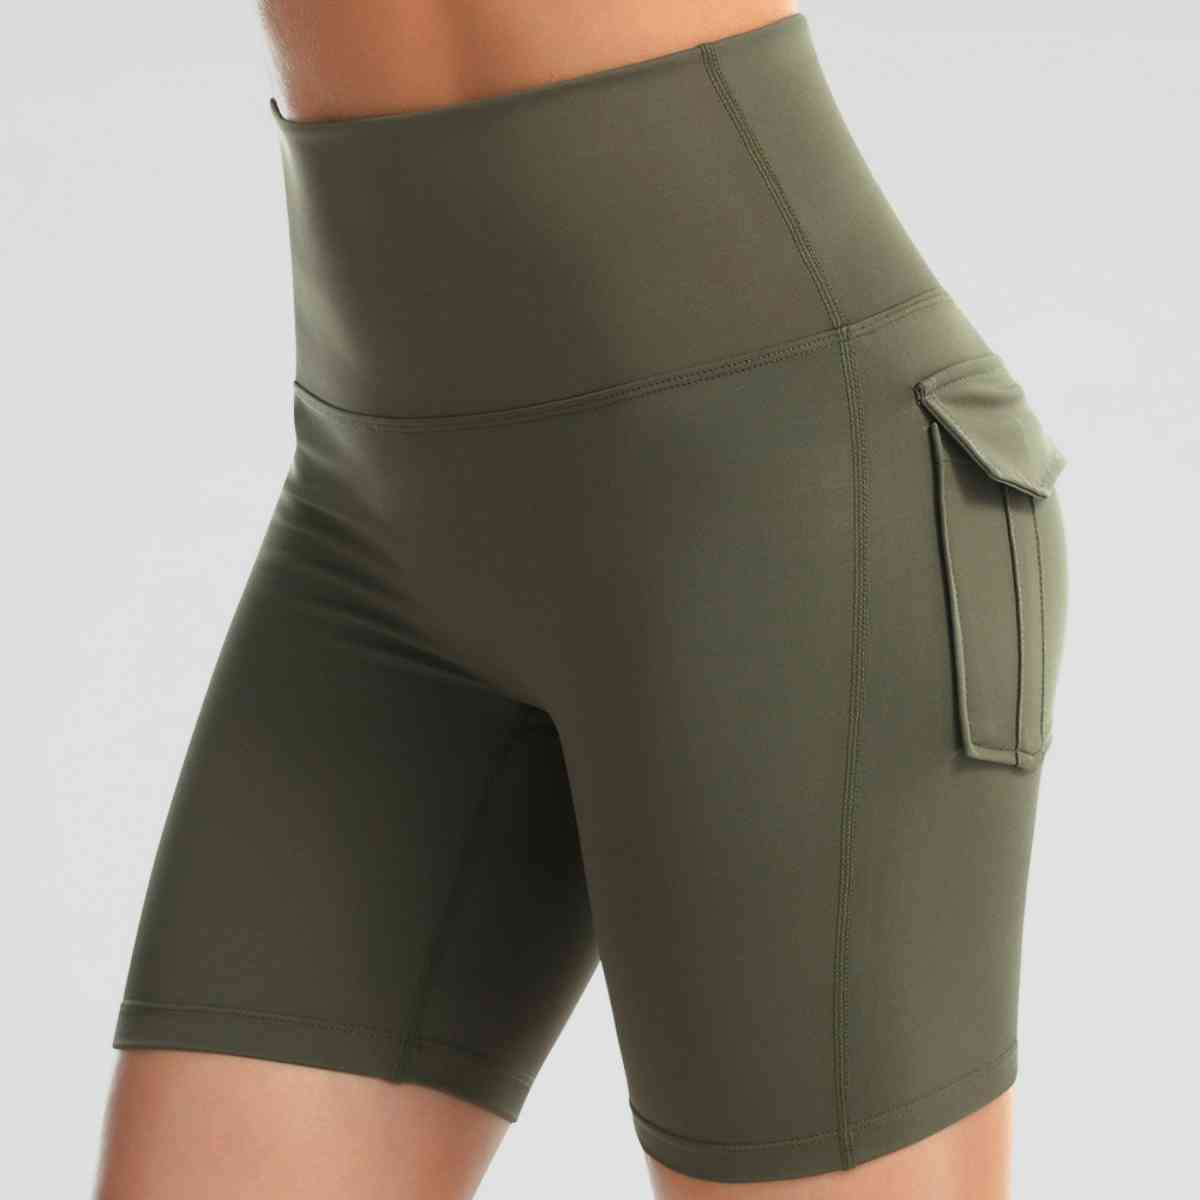 Wide Waistband Sports Shorts With Pockets